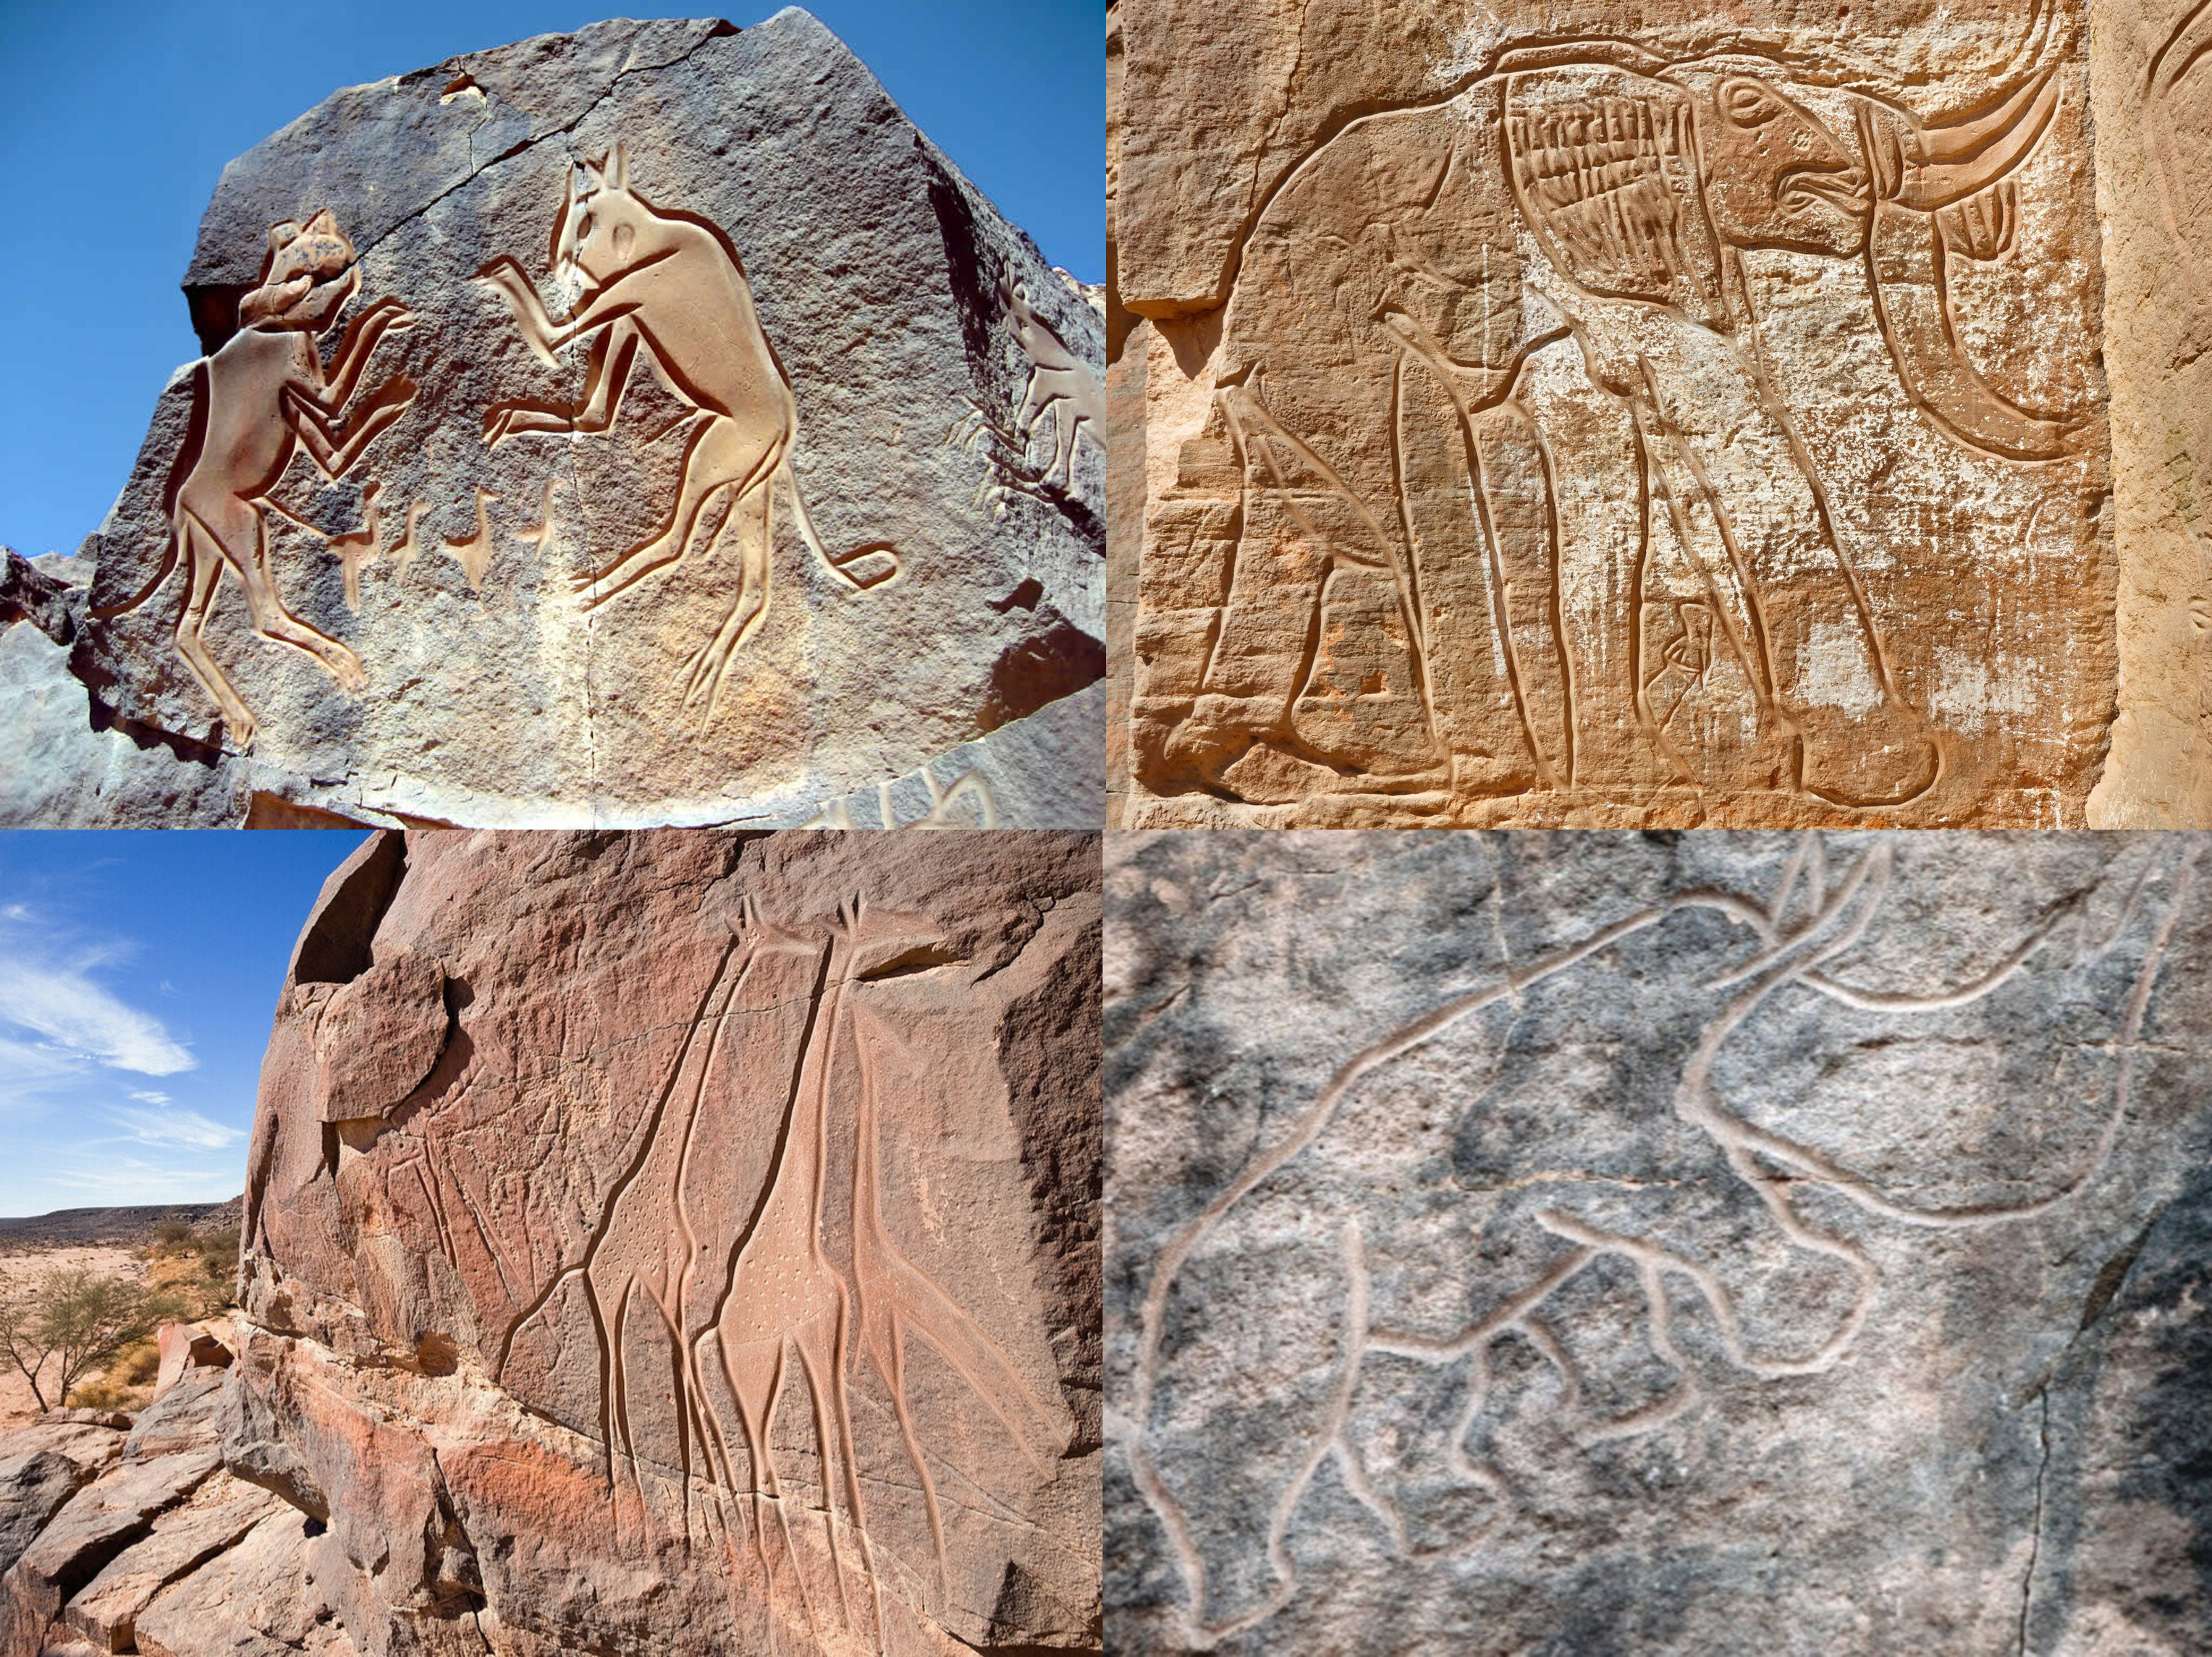 8000-year-old rock engravings depicting fighting felines, giraffes, an elephant and a rhinoceros. Located at the prehistoric site of Wadi Mathendous in Libya, back when the Sahara was green.jpg